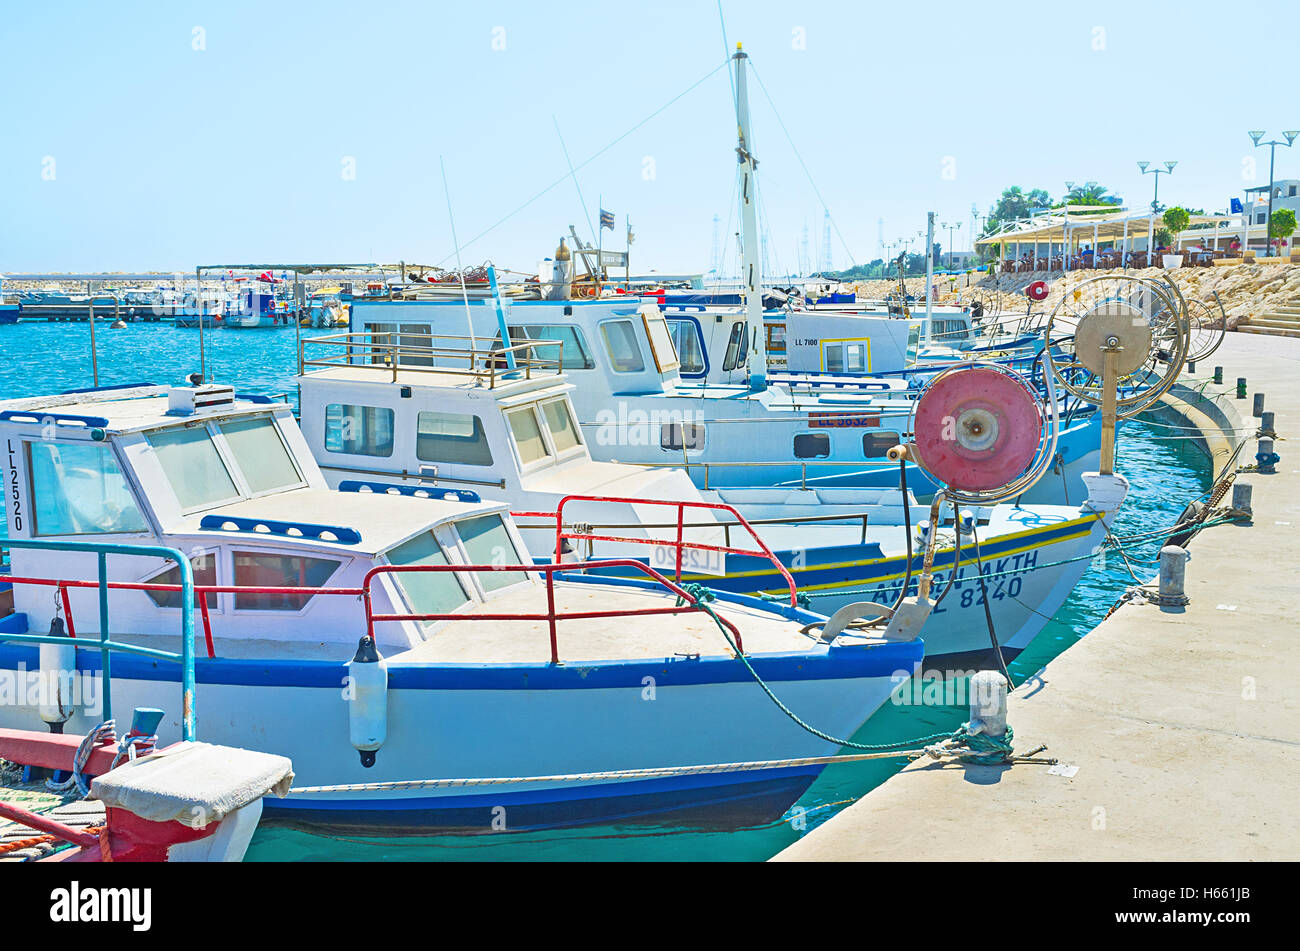 The promenade along the port in the small fishing village of Zugi, Cyprus. Stock Photo